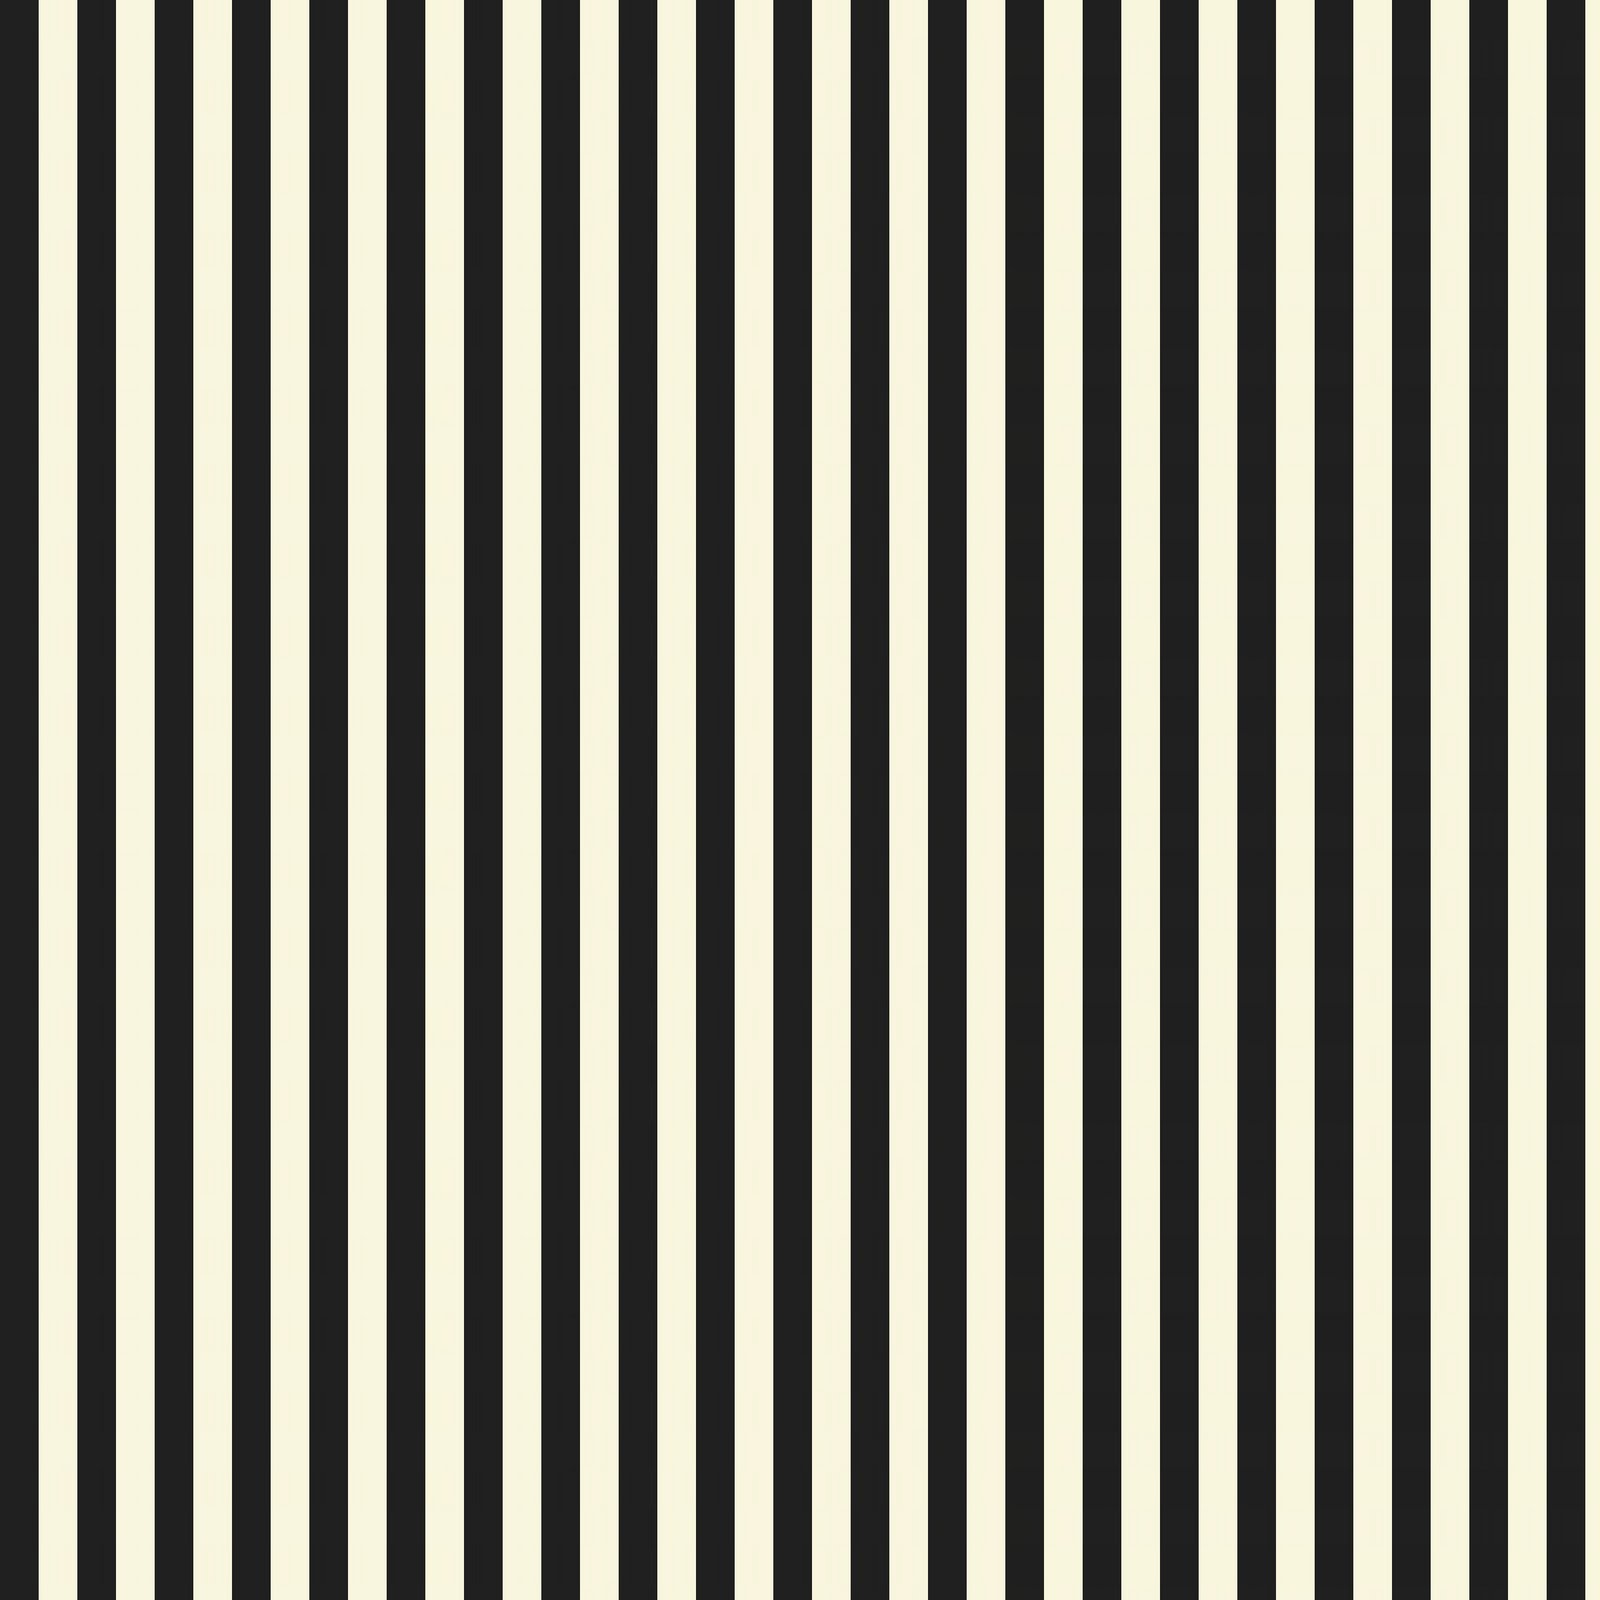  to download save jpg image very versatile black and white stripe paper